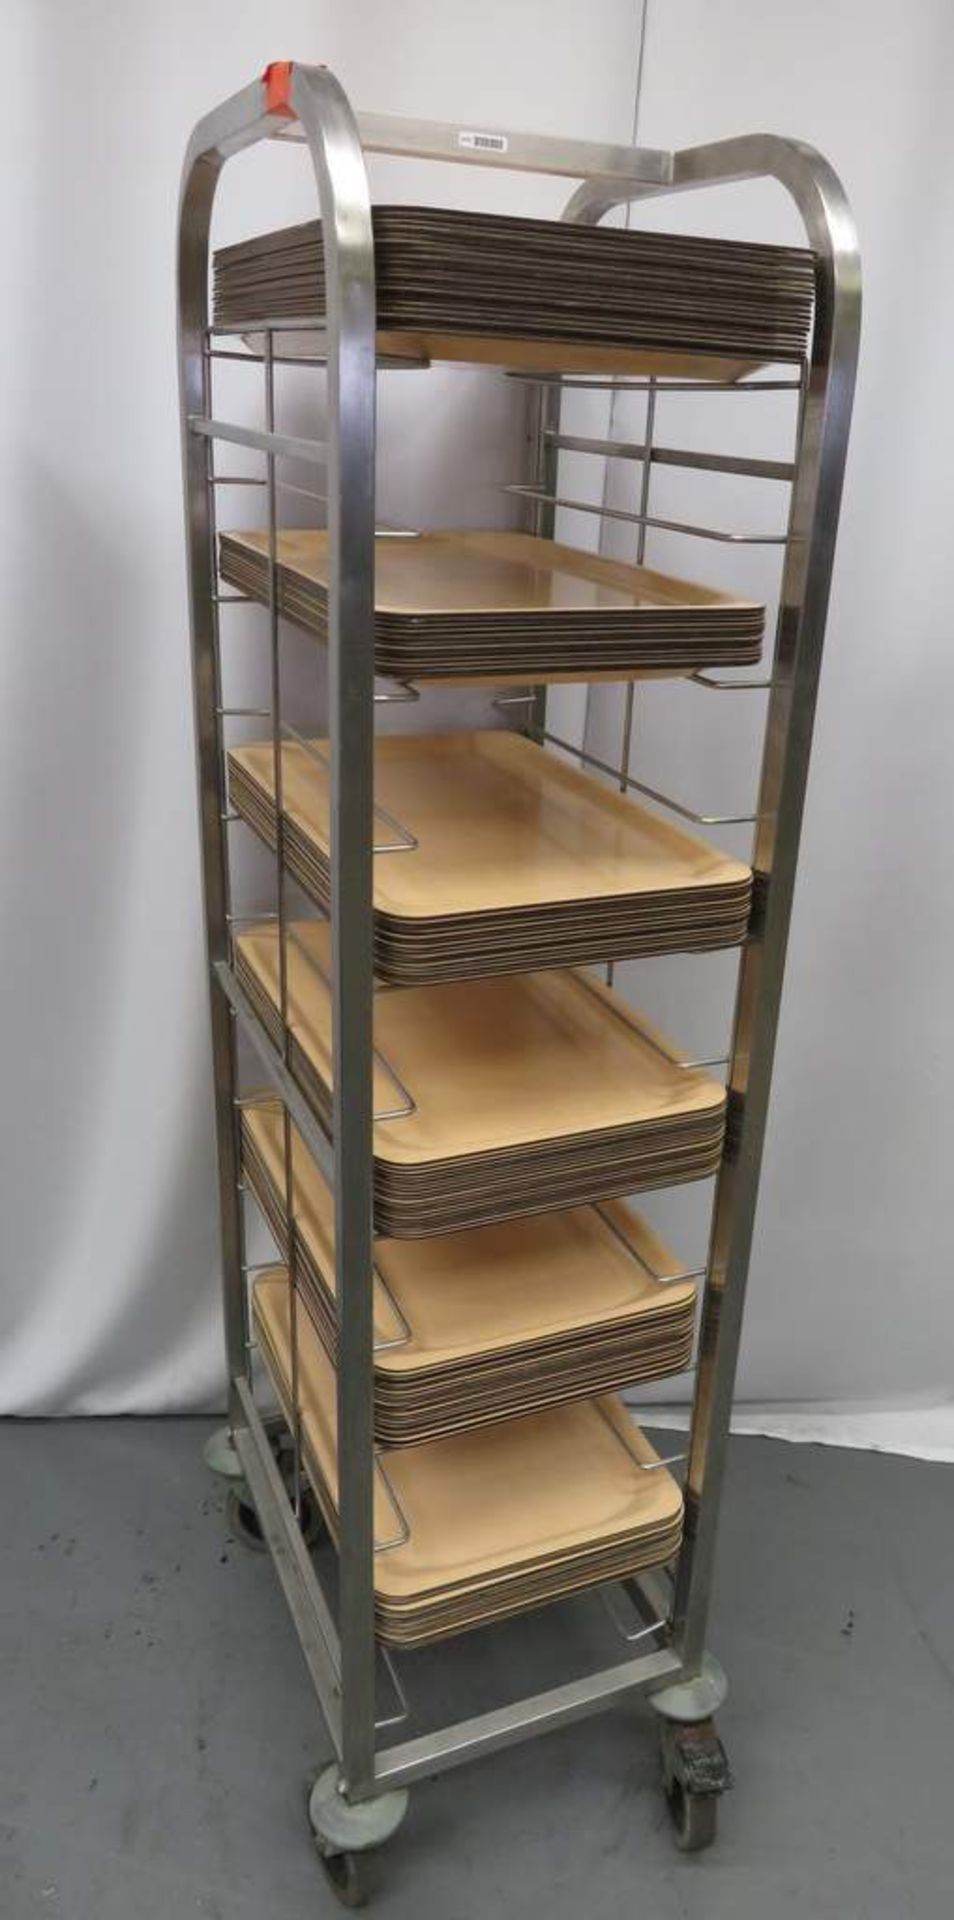 Single Tray Rack Mobile With Trays L380xW540xH1600mm (LxWxH)